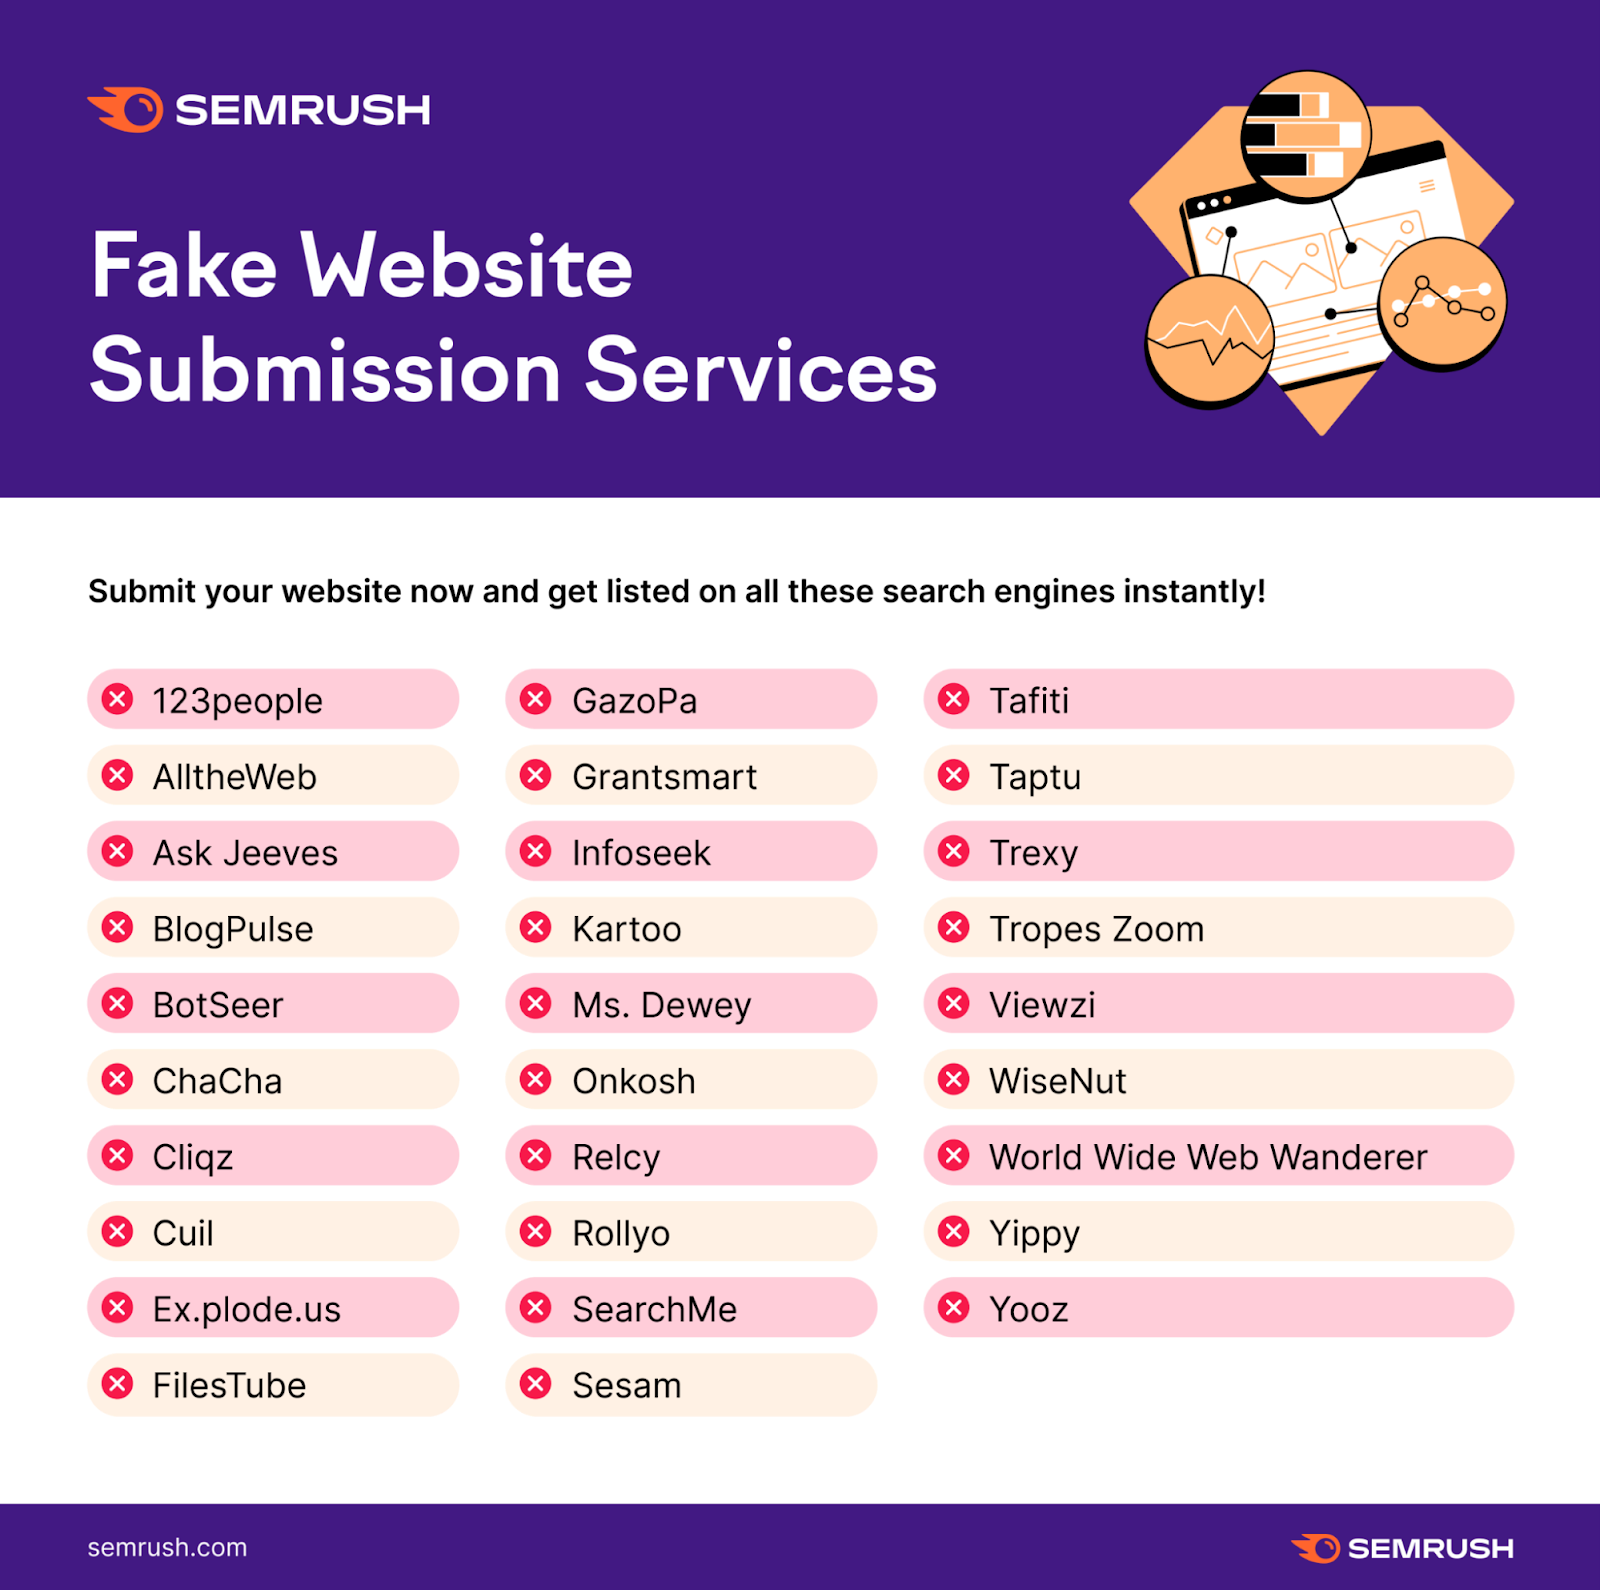 an infographic by Semrush listing fake website submission services